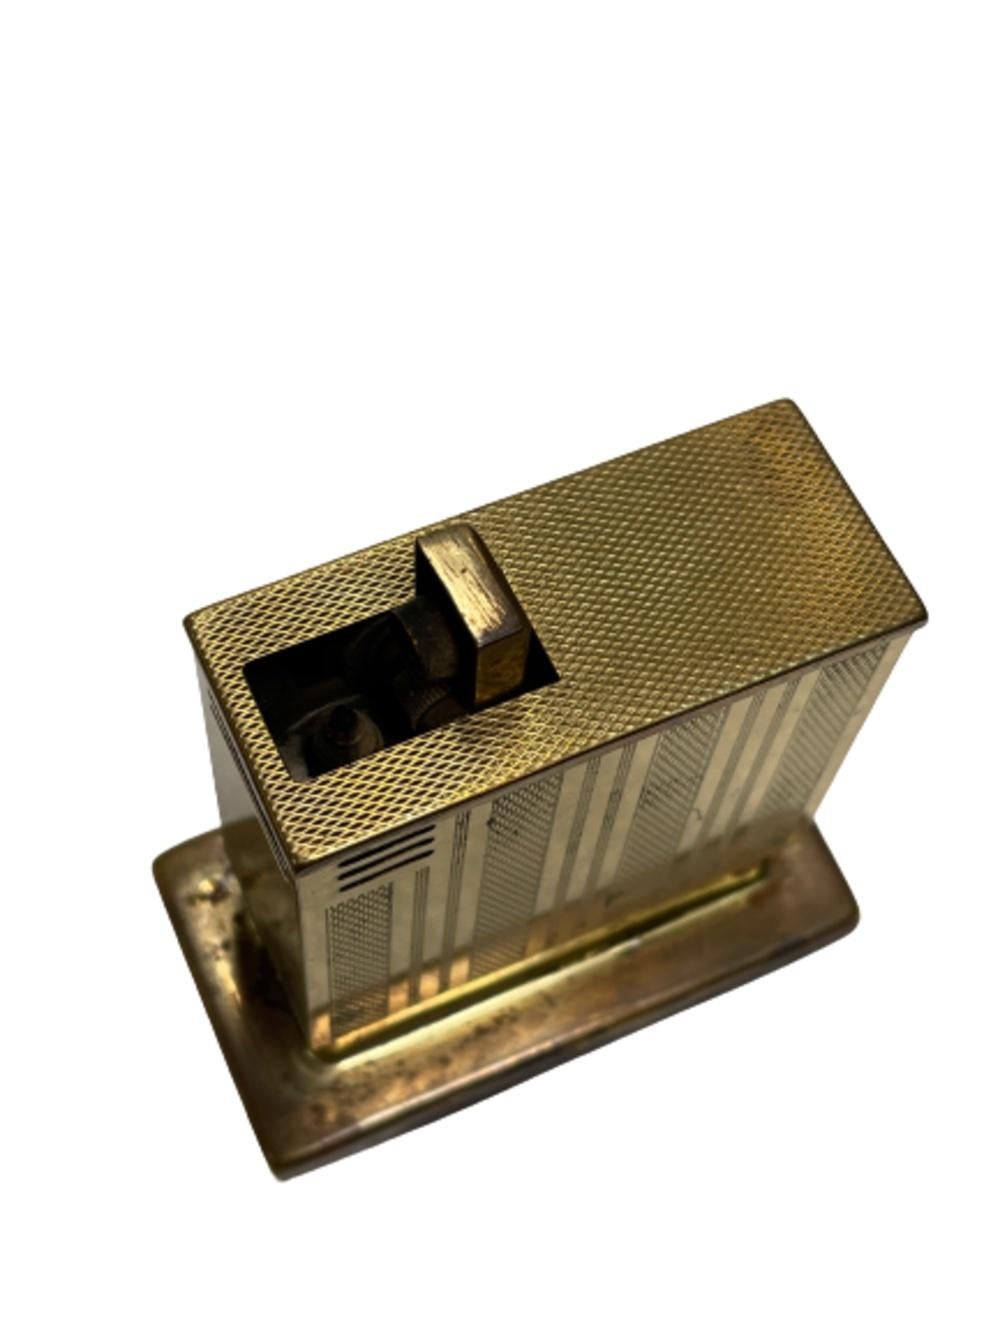 Mid-20th Century West German Augusta Semi-Auto Lift Brass Table Lighter, circa 1950 For Sale